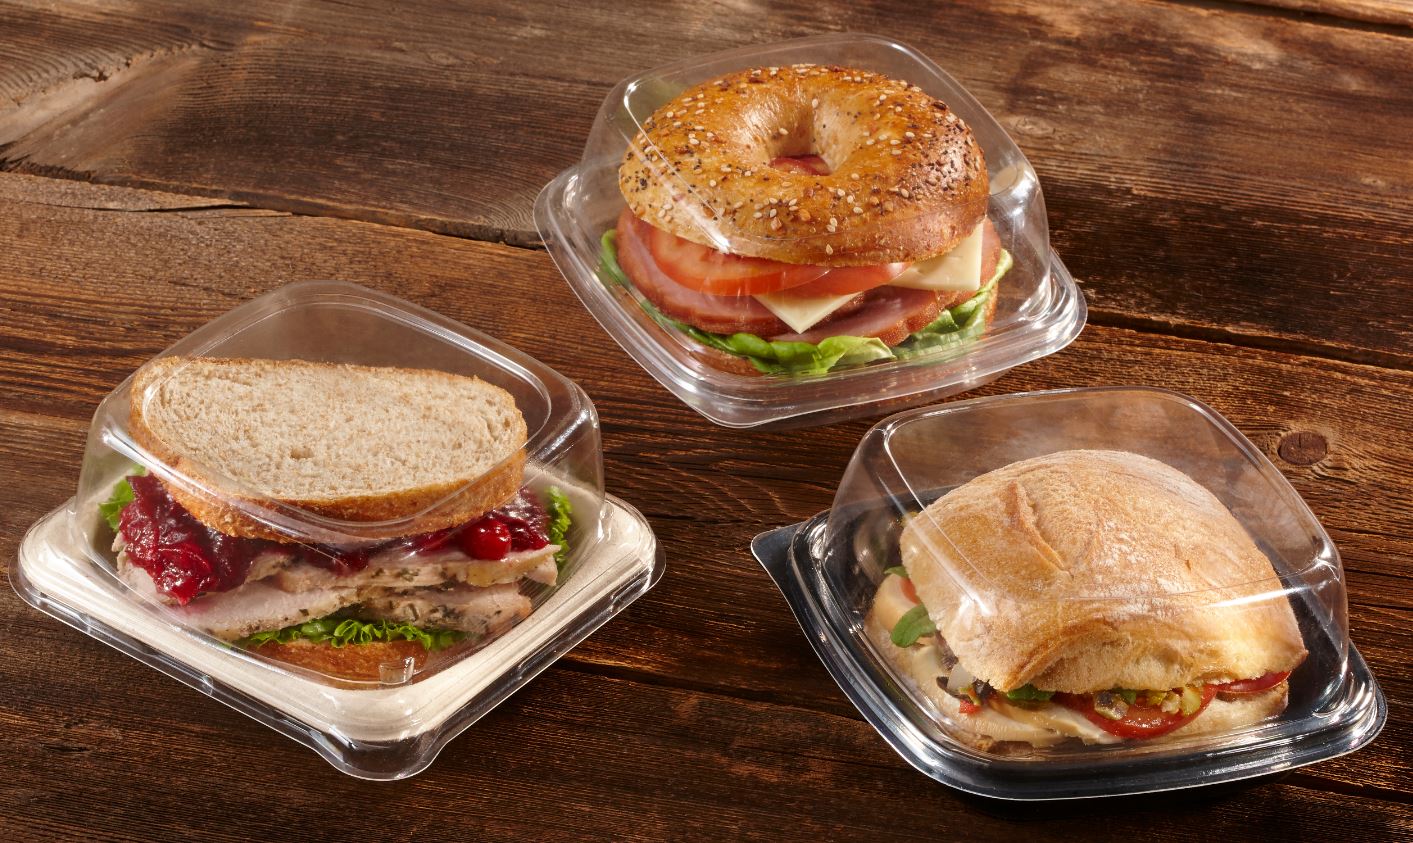 Ongemak Commissie Karu Sabert Corporation on Twitter: "Happy National Sandwich Day! Our Snack  Collection has your sandwich packaging solutions! https://t.co/8ocIB7HkjT  https://t.co/Olgt2KOqCF" / Twitter